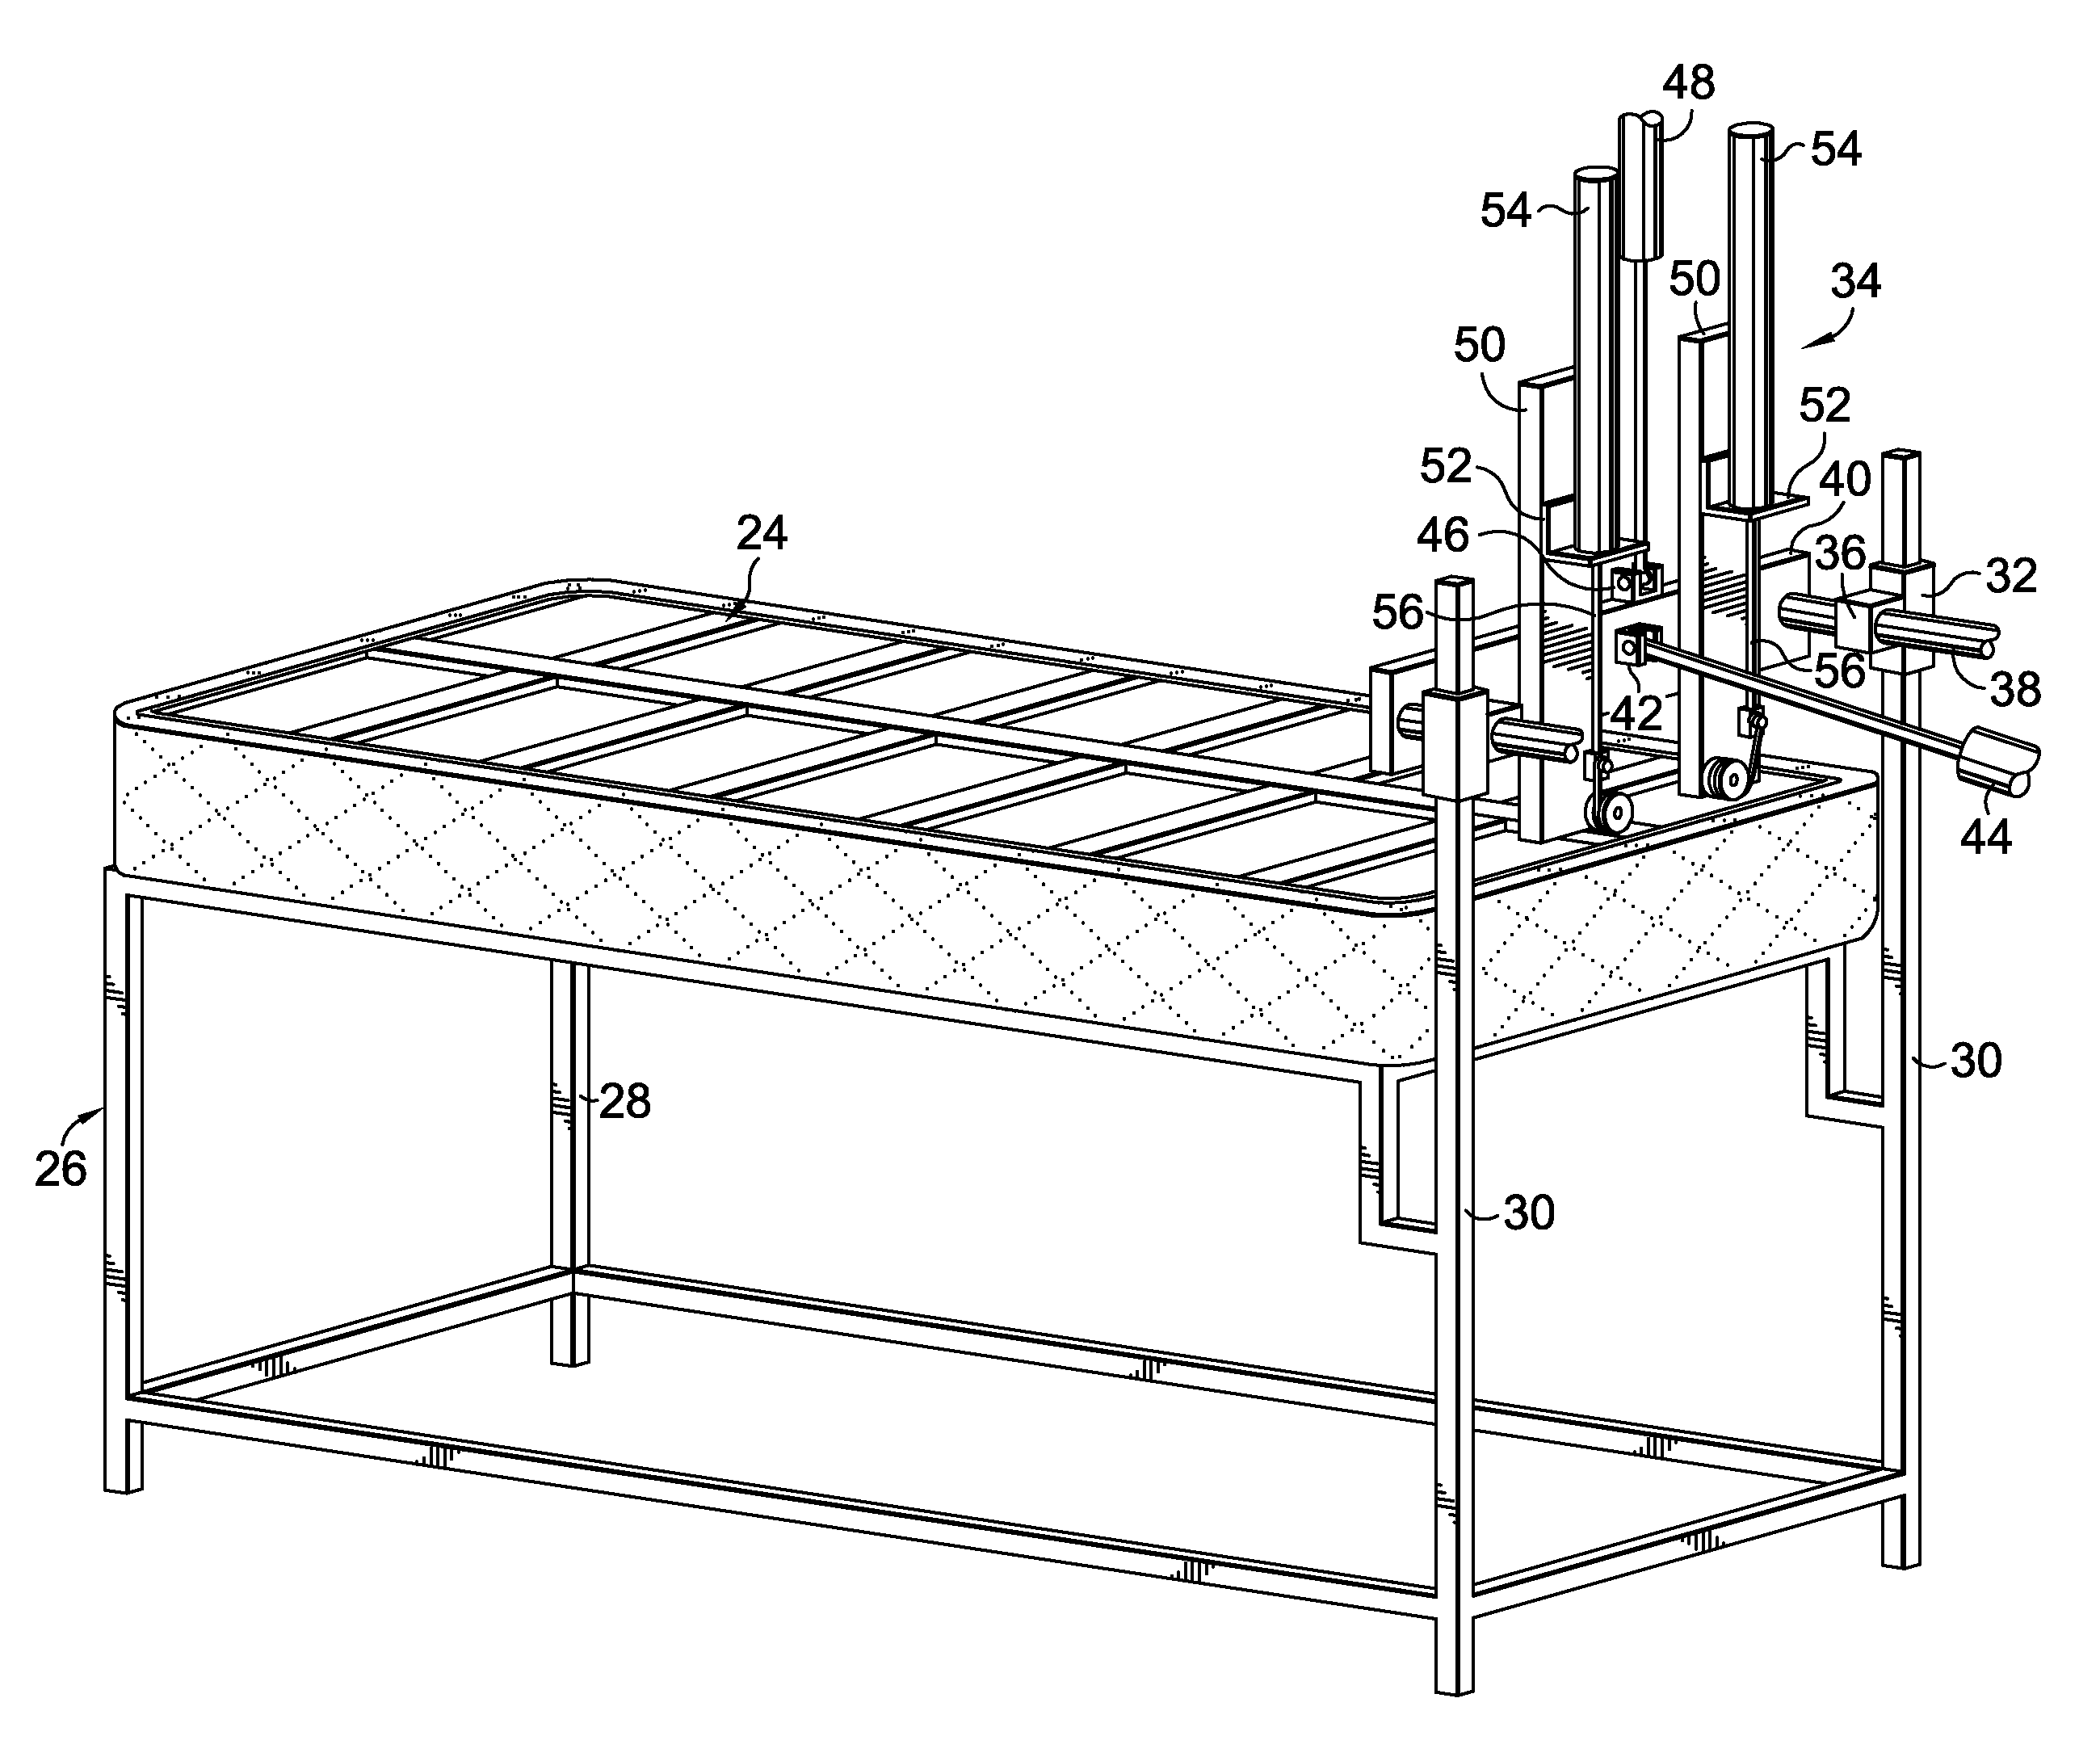 Apparatus and method for upholstering box springs